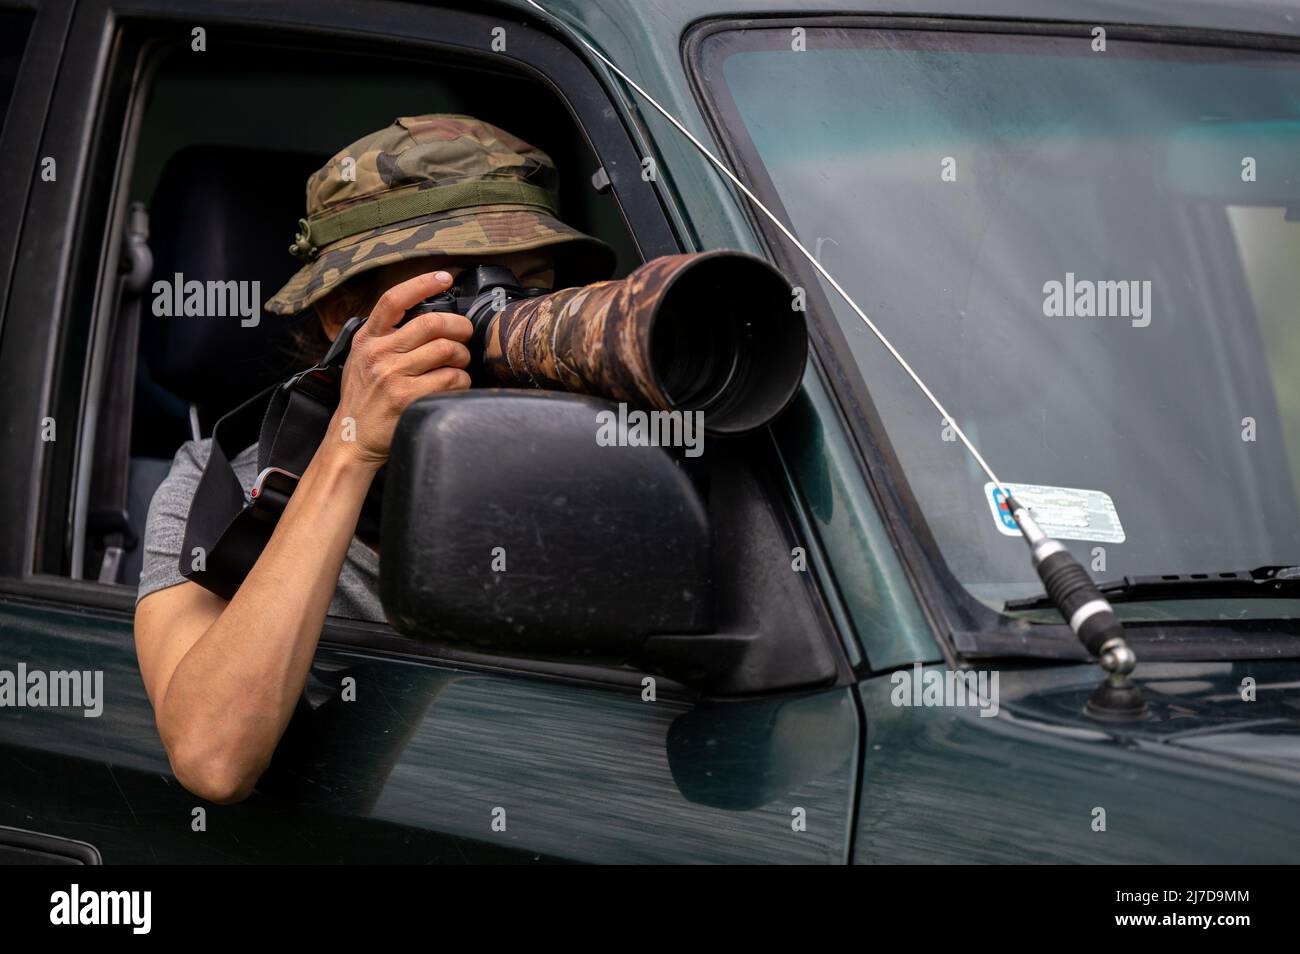 Female paparazzi detective taking pictures from the hide. Stock Photo